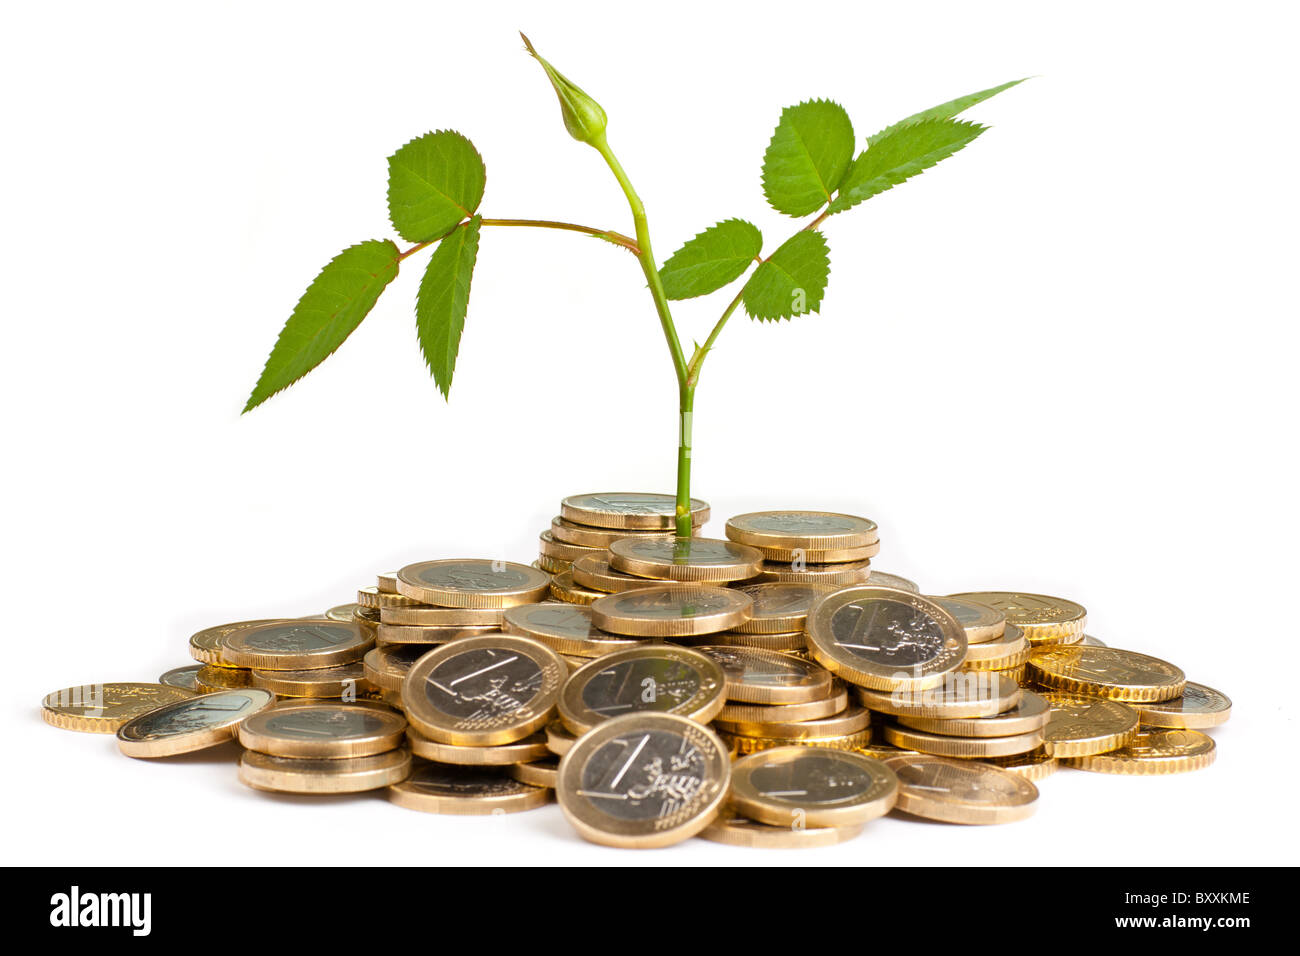 New green plant shoot growing from money Stock Photo